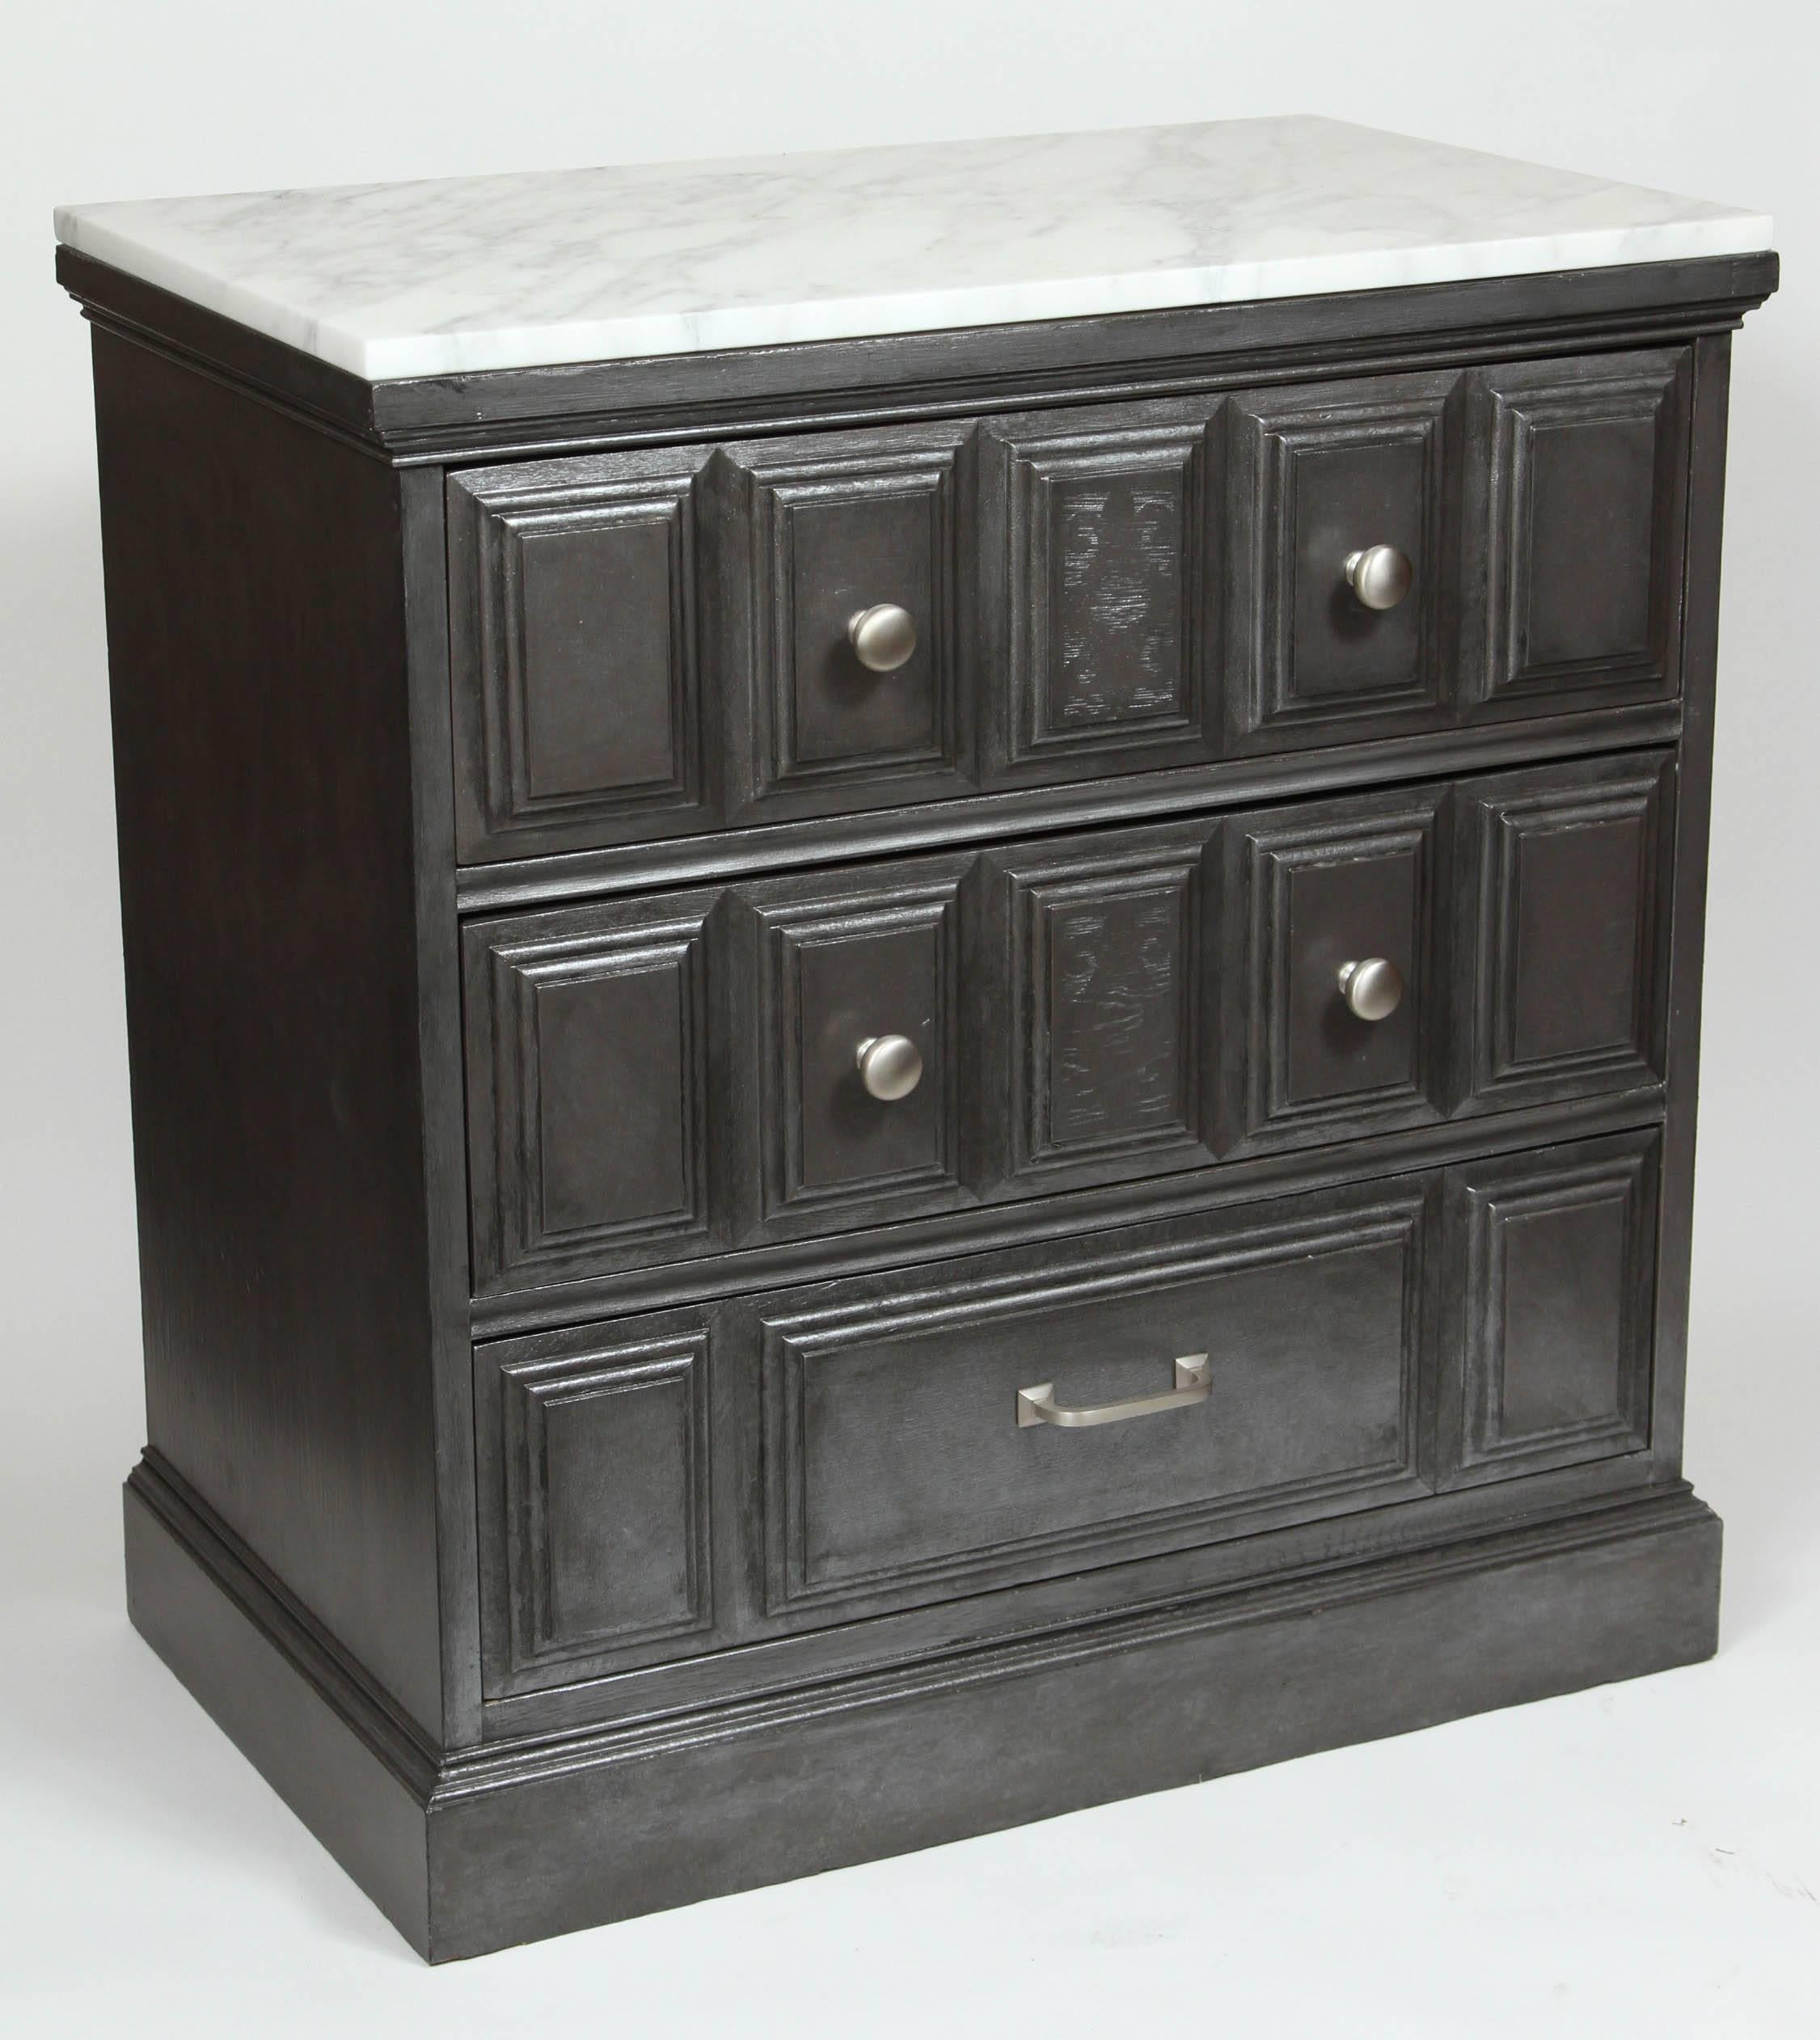 1970s nightstand with new custom painted finish in pewter, new pulls, and new Carrara honeymoon marble top.